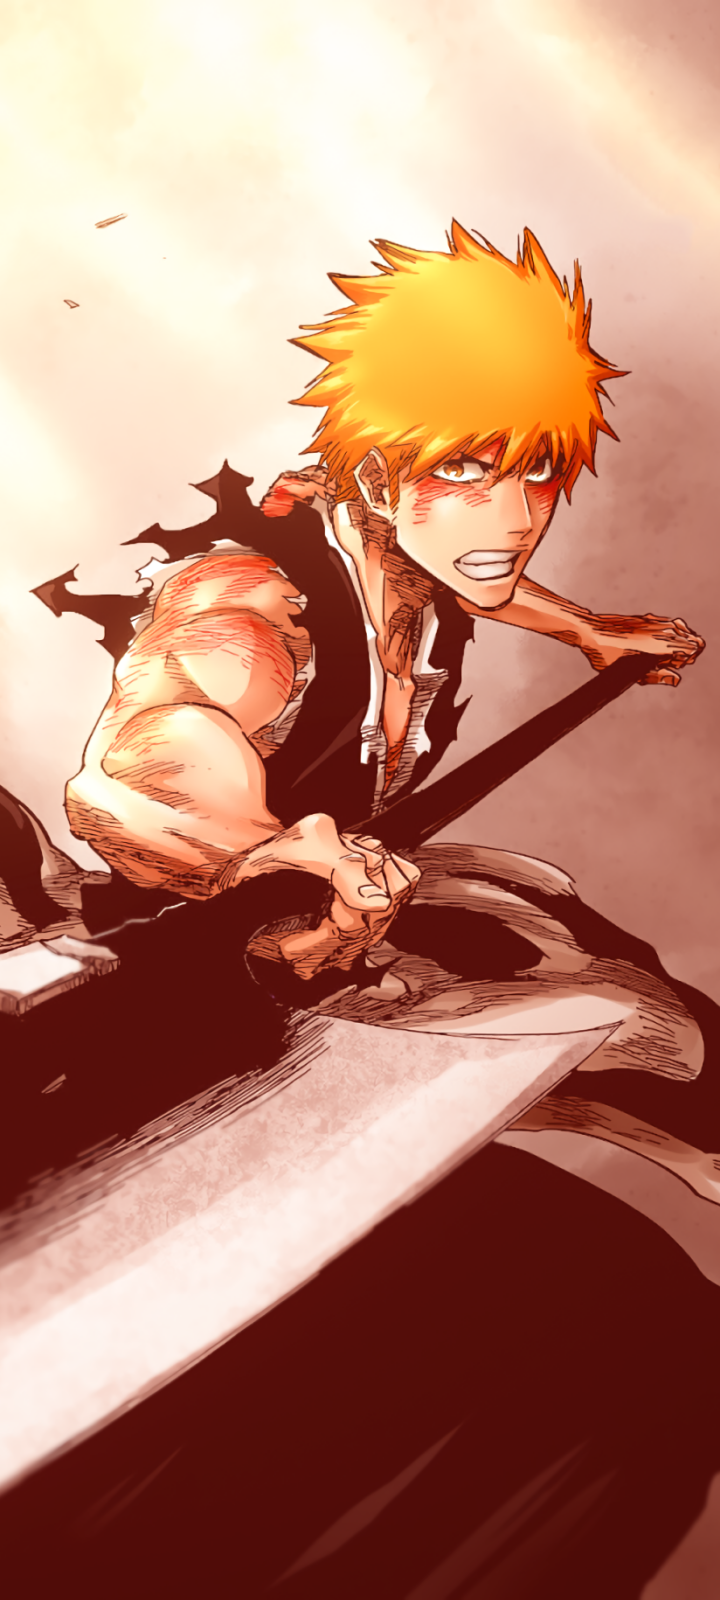 Anime Bleach Phone Wallpaper by Hirata-S. - Mobile Abyss